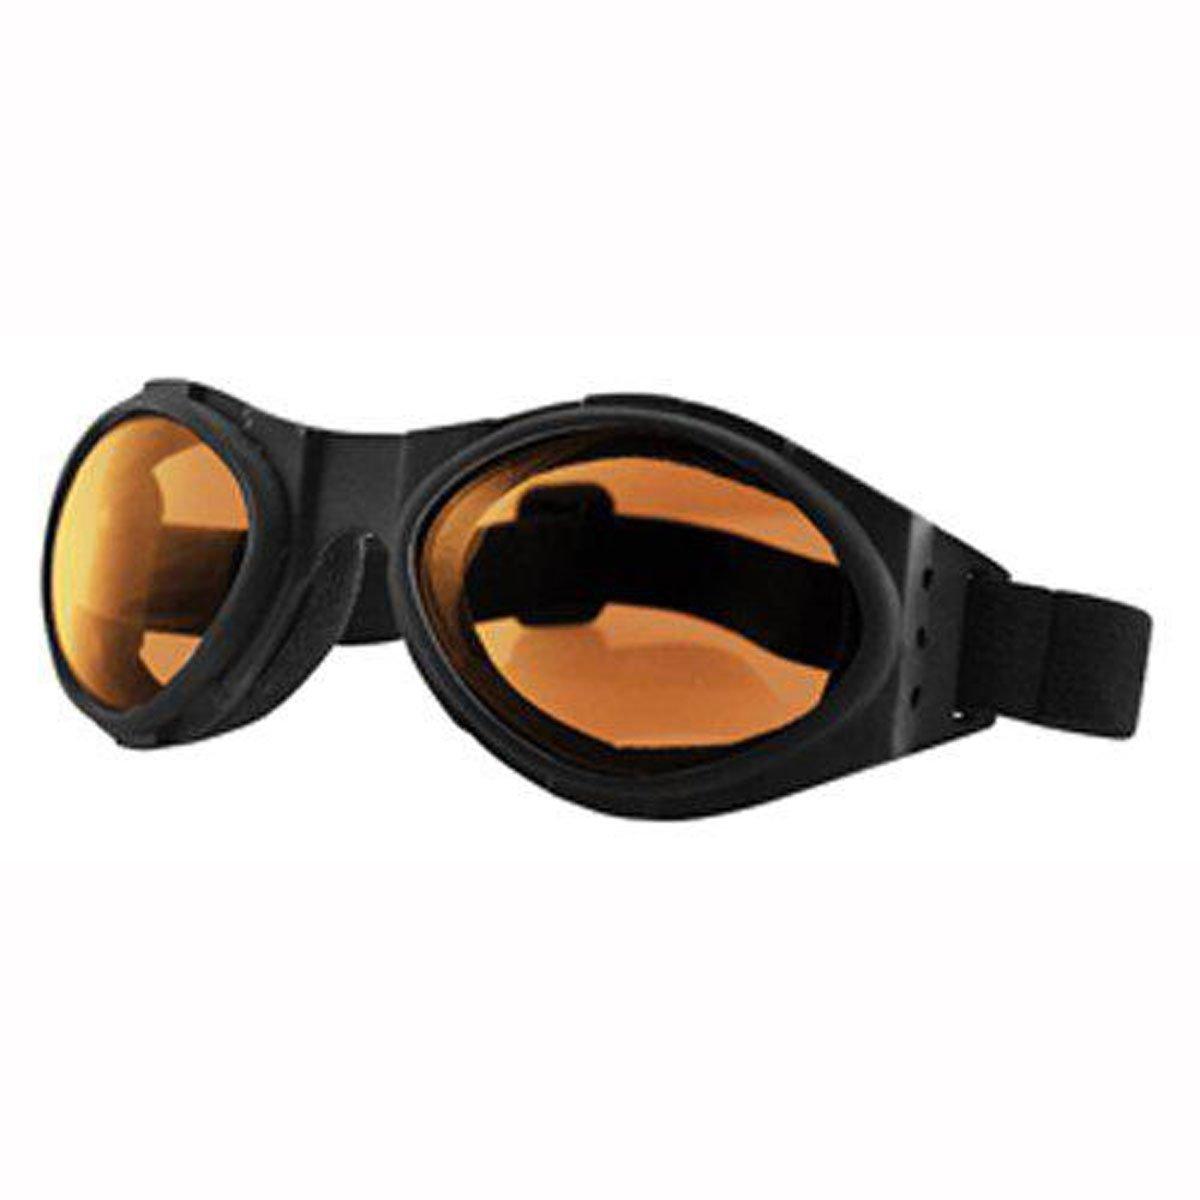 Bobster Bugeye Goggles - Amber - Browse our range of Helmet: Goggles - getgearedshop 